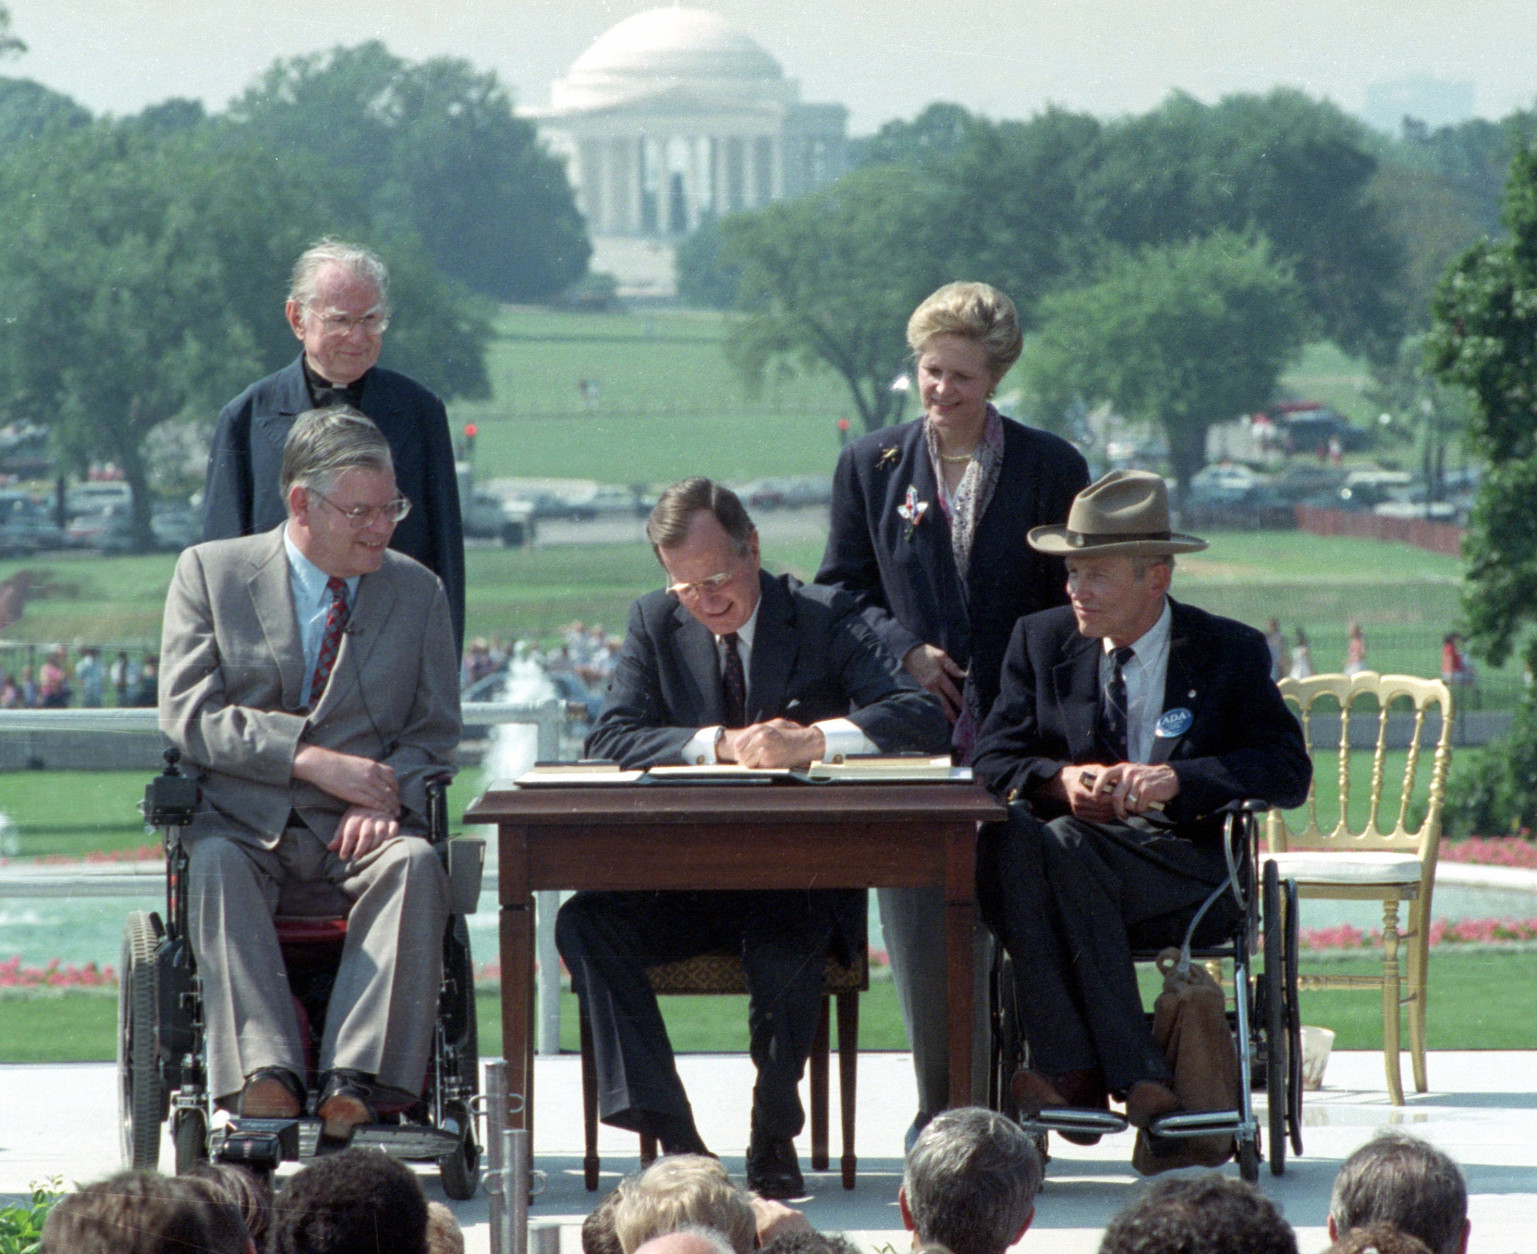 FILE - In this July 26, 1990 file photo, President George H. W. Bush signs the Americans with Disabilities Act during a ceremony on the South Lawn of the White House. Joining the president are, from left, Evan Kemp, chairman of the Equal Opportunity Employment Commission; Rev. Harold Wilke; Sandra Parrino, chairman of the National Council on Disability, and Justin Dart, chairman of The President's Council on Disabilities. TheAmericans with Disabilities Act, which was signed into law 25 years ago, on July 26, 1990.  (AP Photo/Barry Thumma)